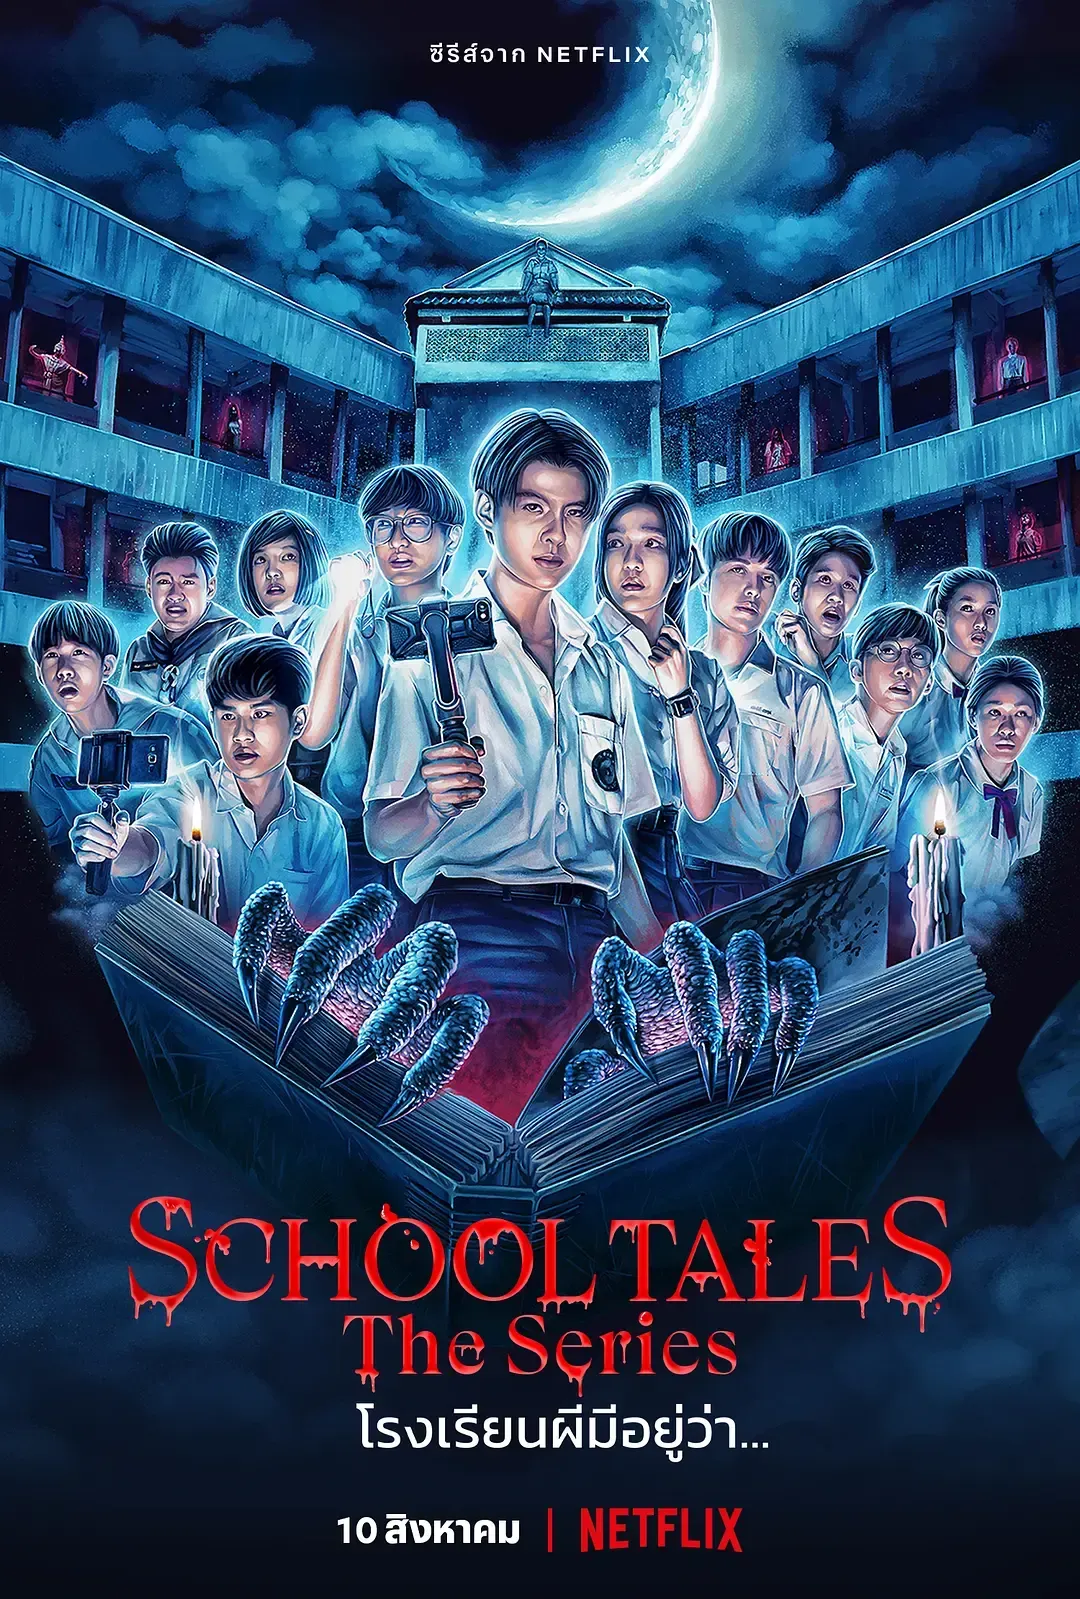 Netflix horror Thai drama "School Tales The Series" releases Official Trailer, it will be available on August 10 | FMV6